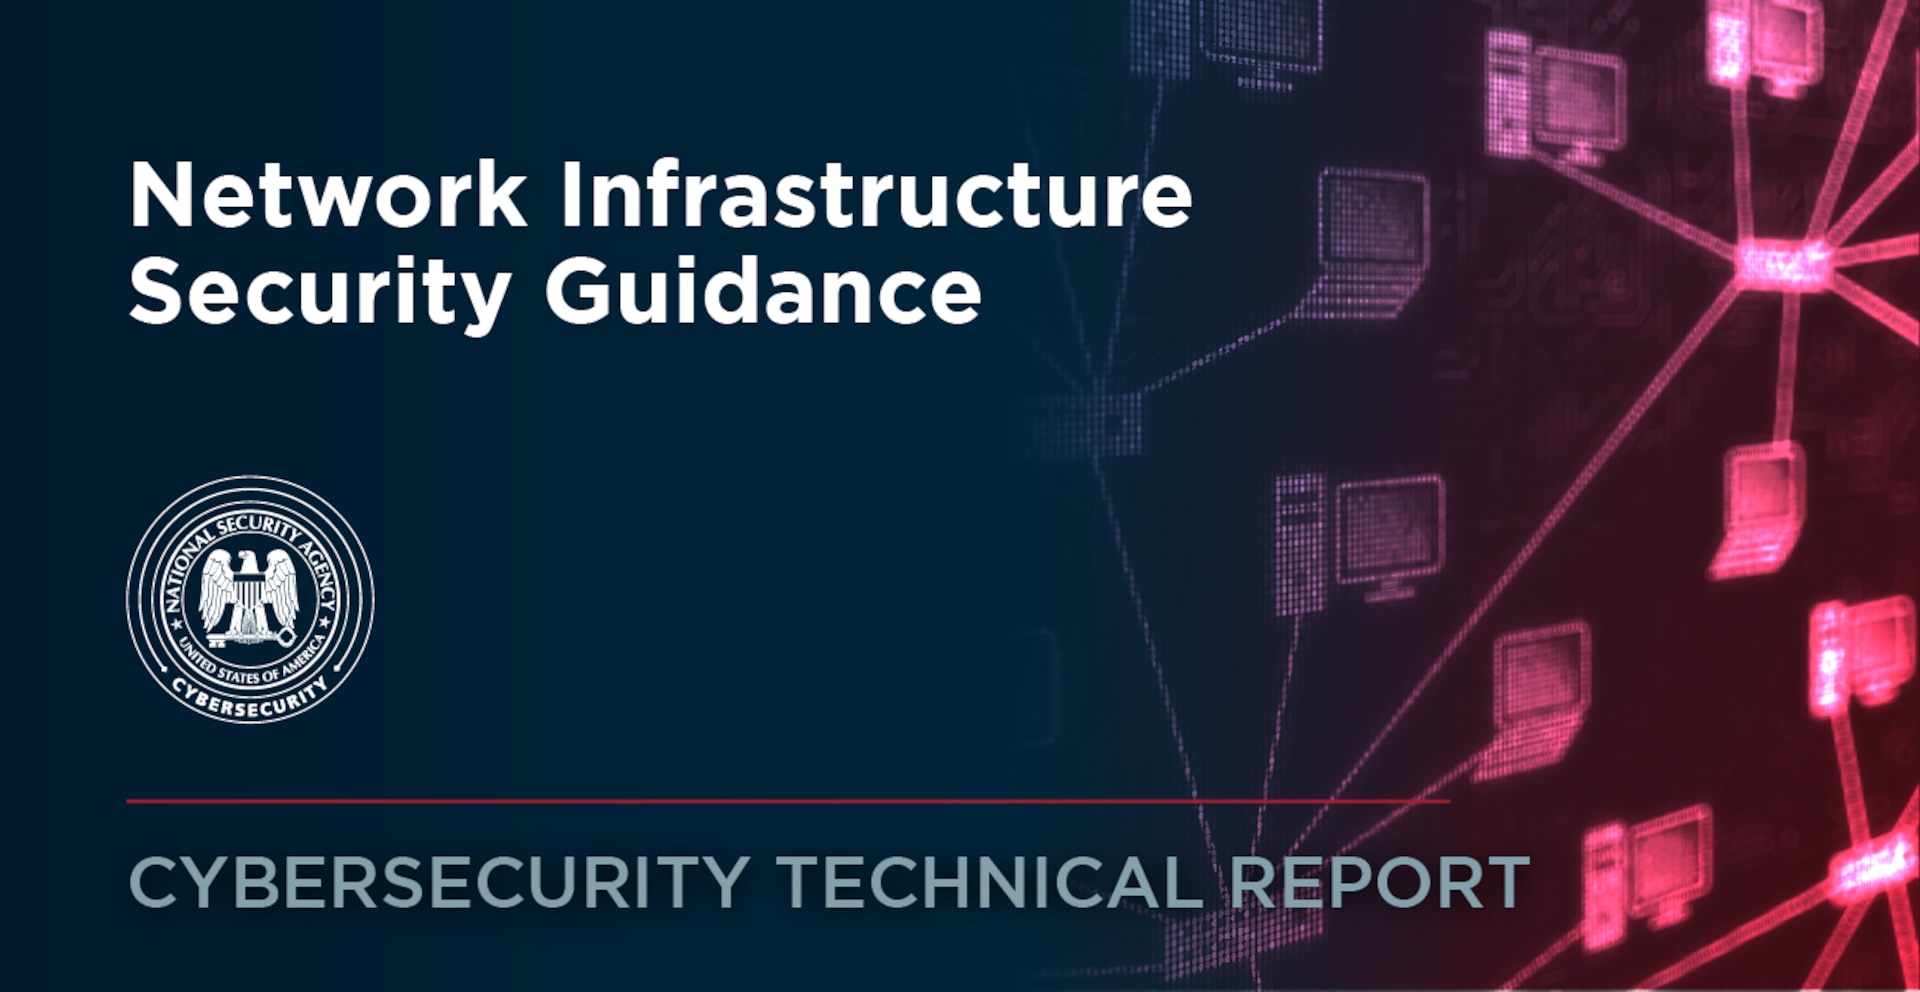 CTR: Network Infrastructure Security Guidance